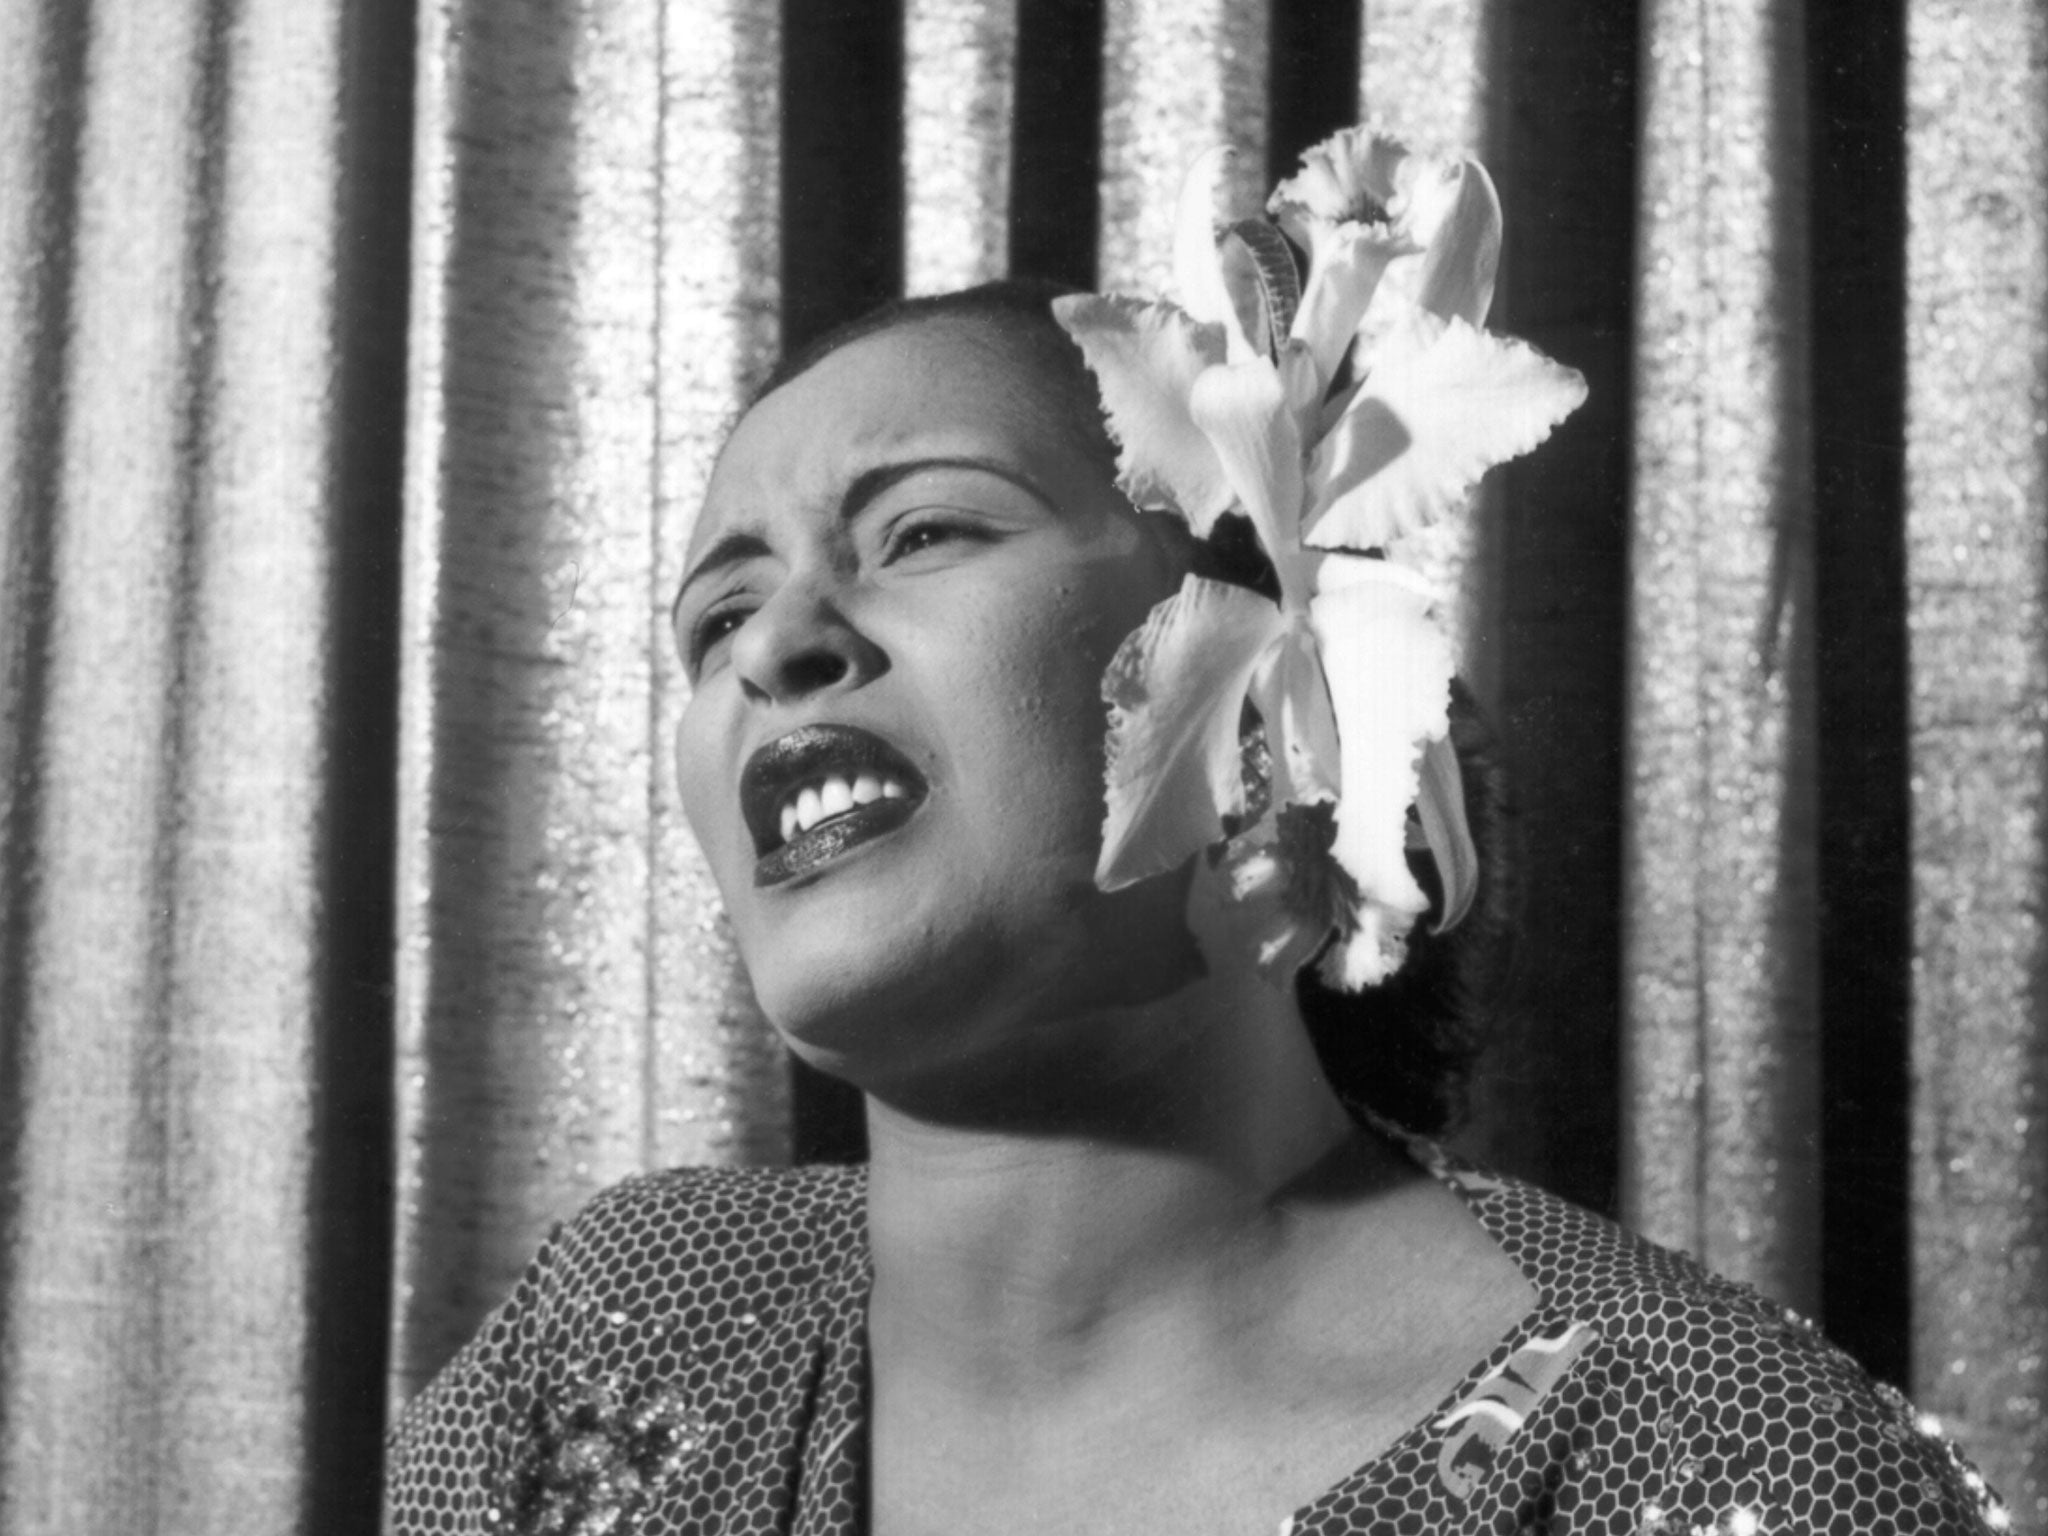 Wondrous sounds: Billie Holiday singing in the early 1950s